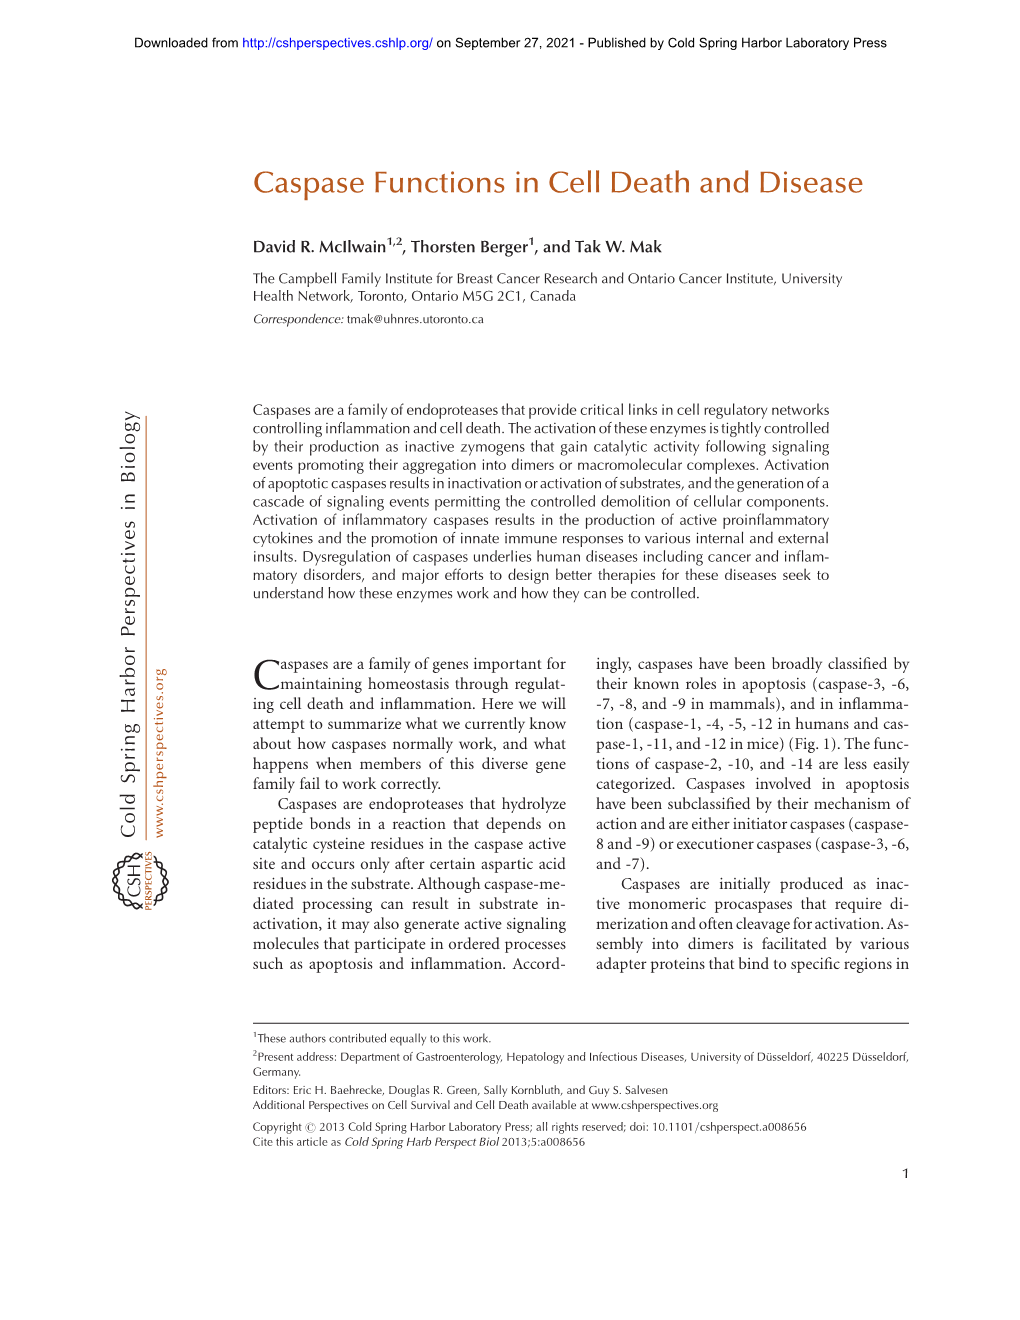 Caspase Functions in Cell Death and Disease